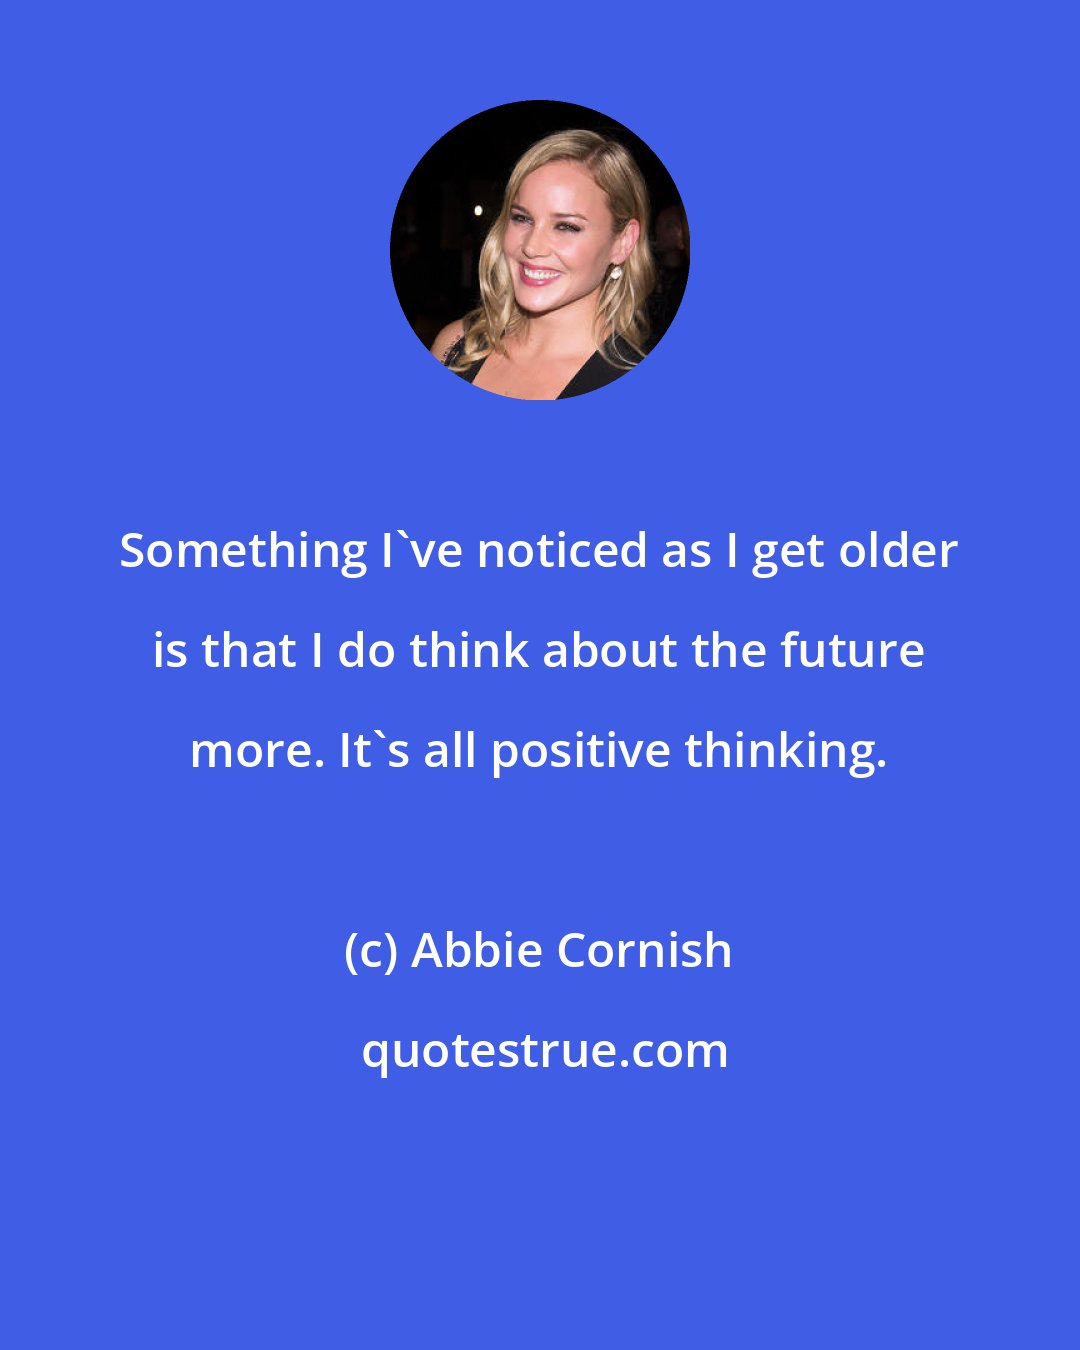 Abbie Cornish: Something I've noticed as I get older is that I do think about the future more. It's all positive thinking.